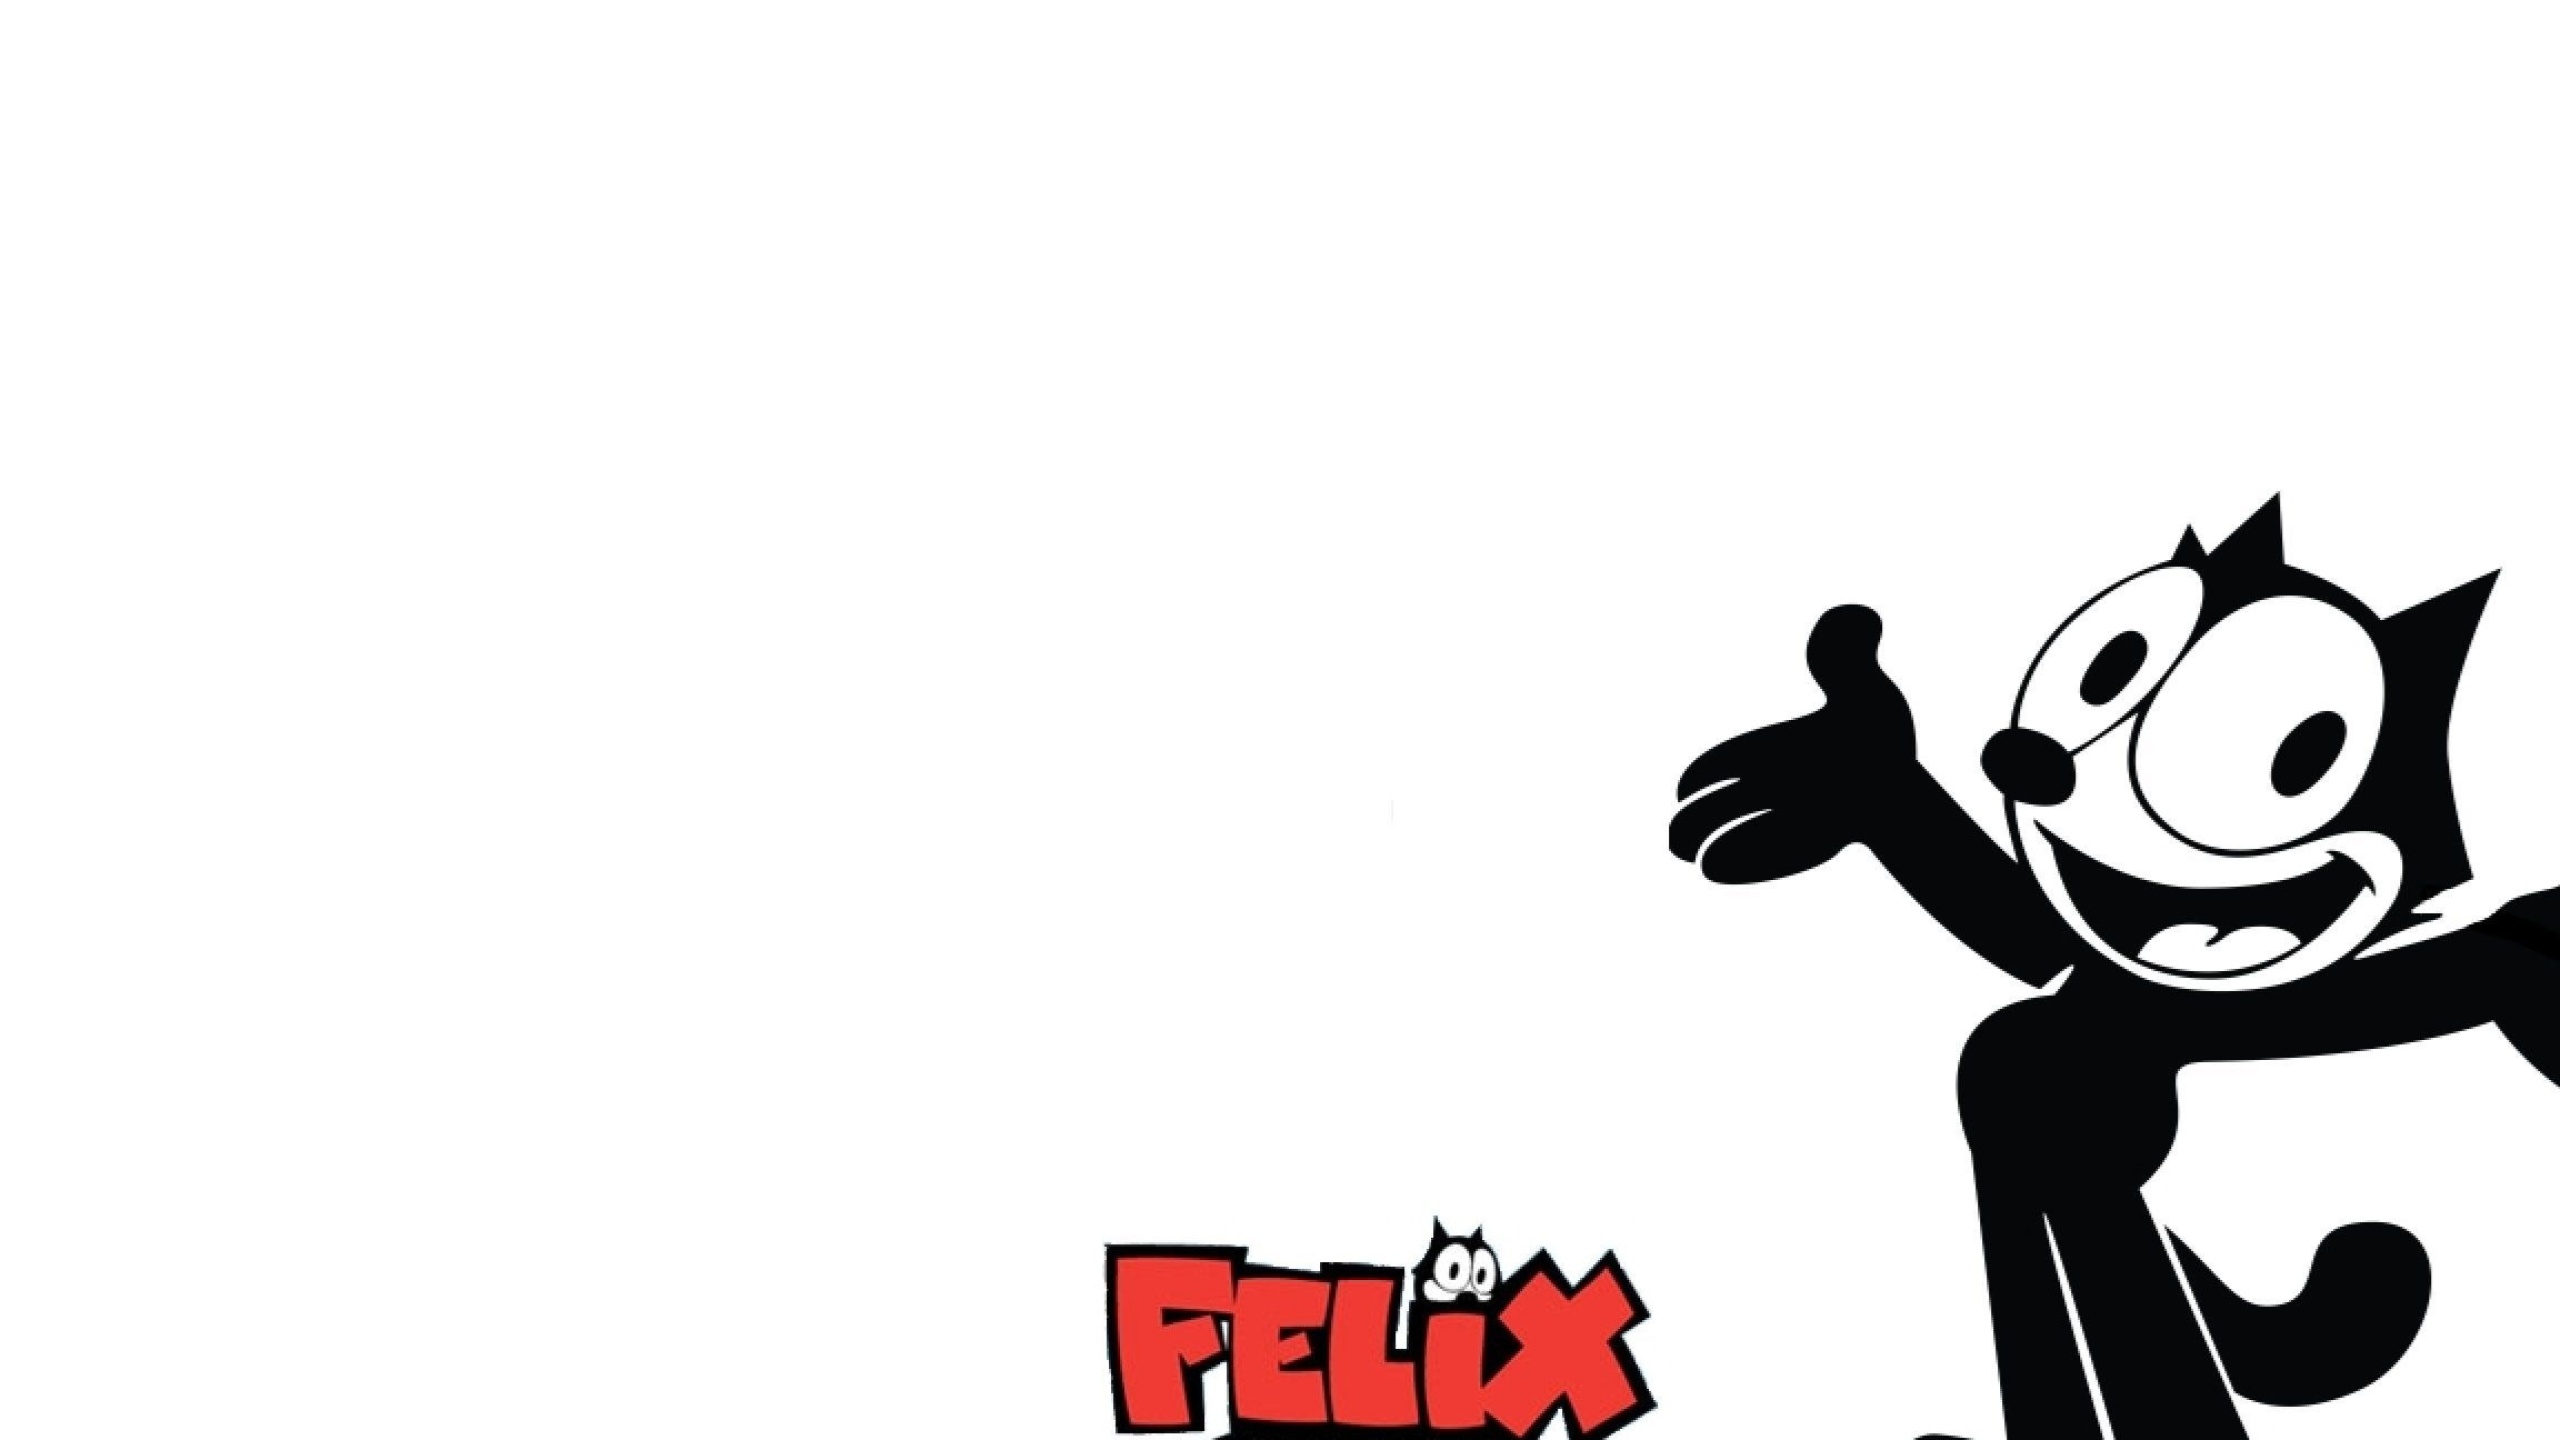 Felix the Cat, Top wallpapers, Classic animation, Whimsical character, 2560x1440 HD Desktop